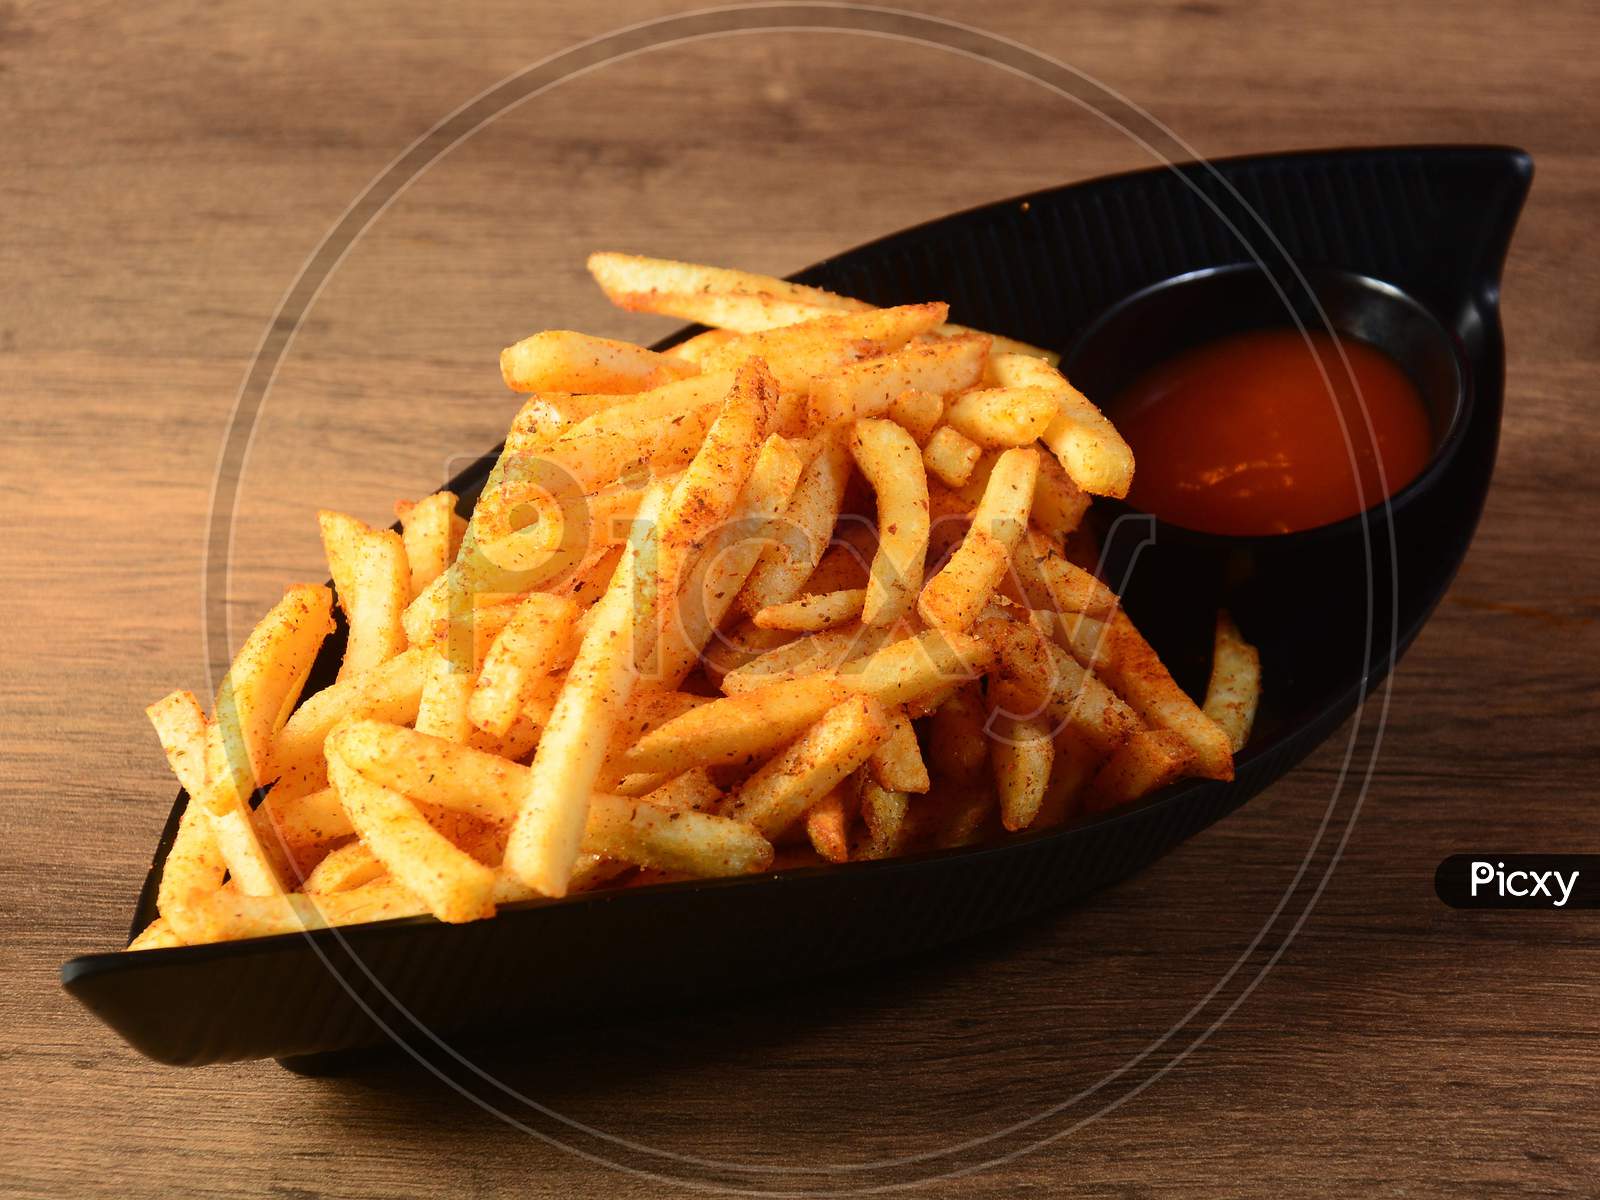 Tasty Spicy Peri Peri French Fries With Tomato Ketchup Served In A Bowl Over A Rustic Wooden Background, Selective Focus